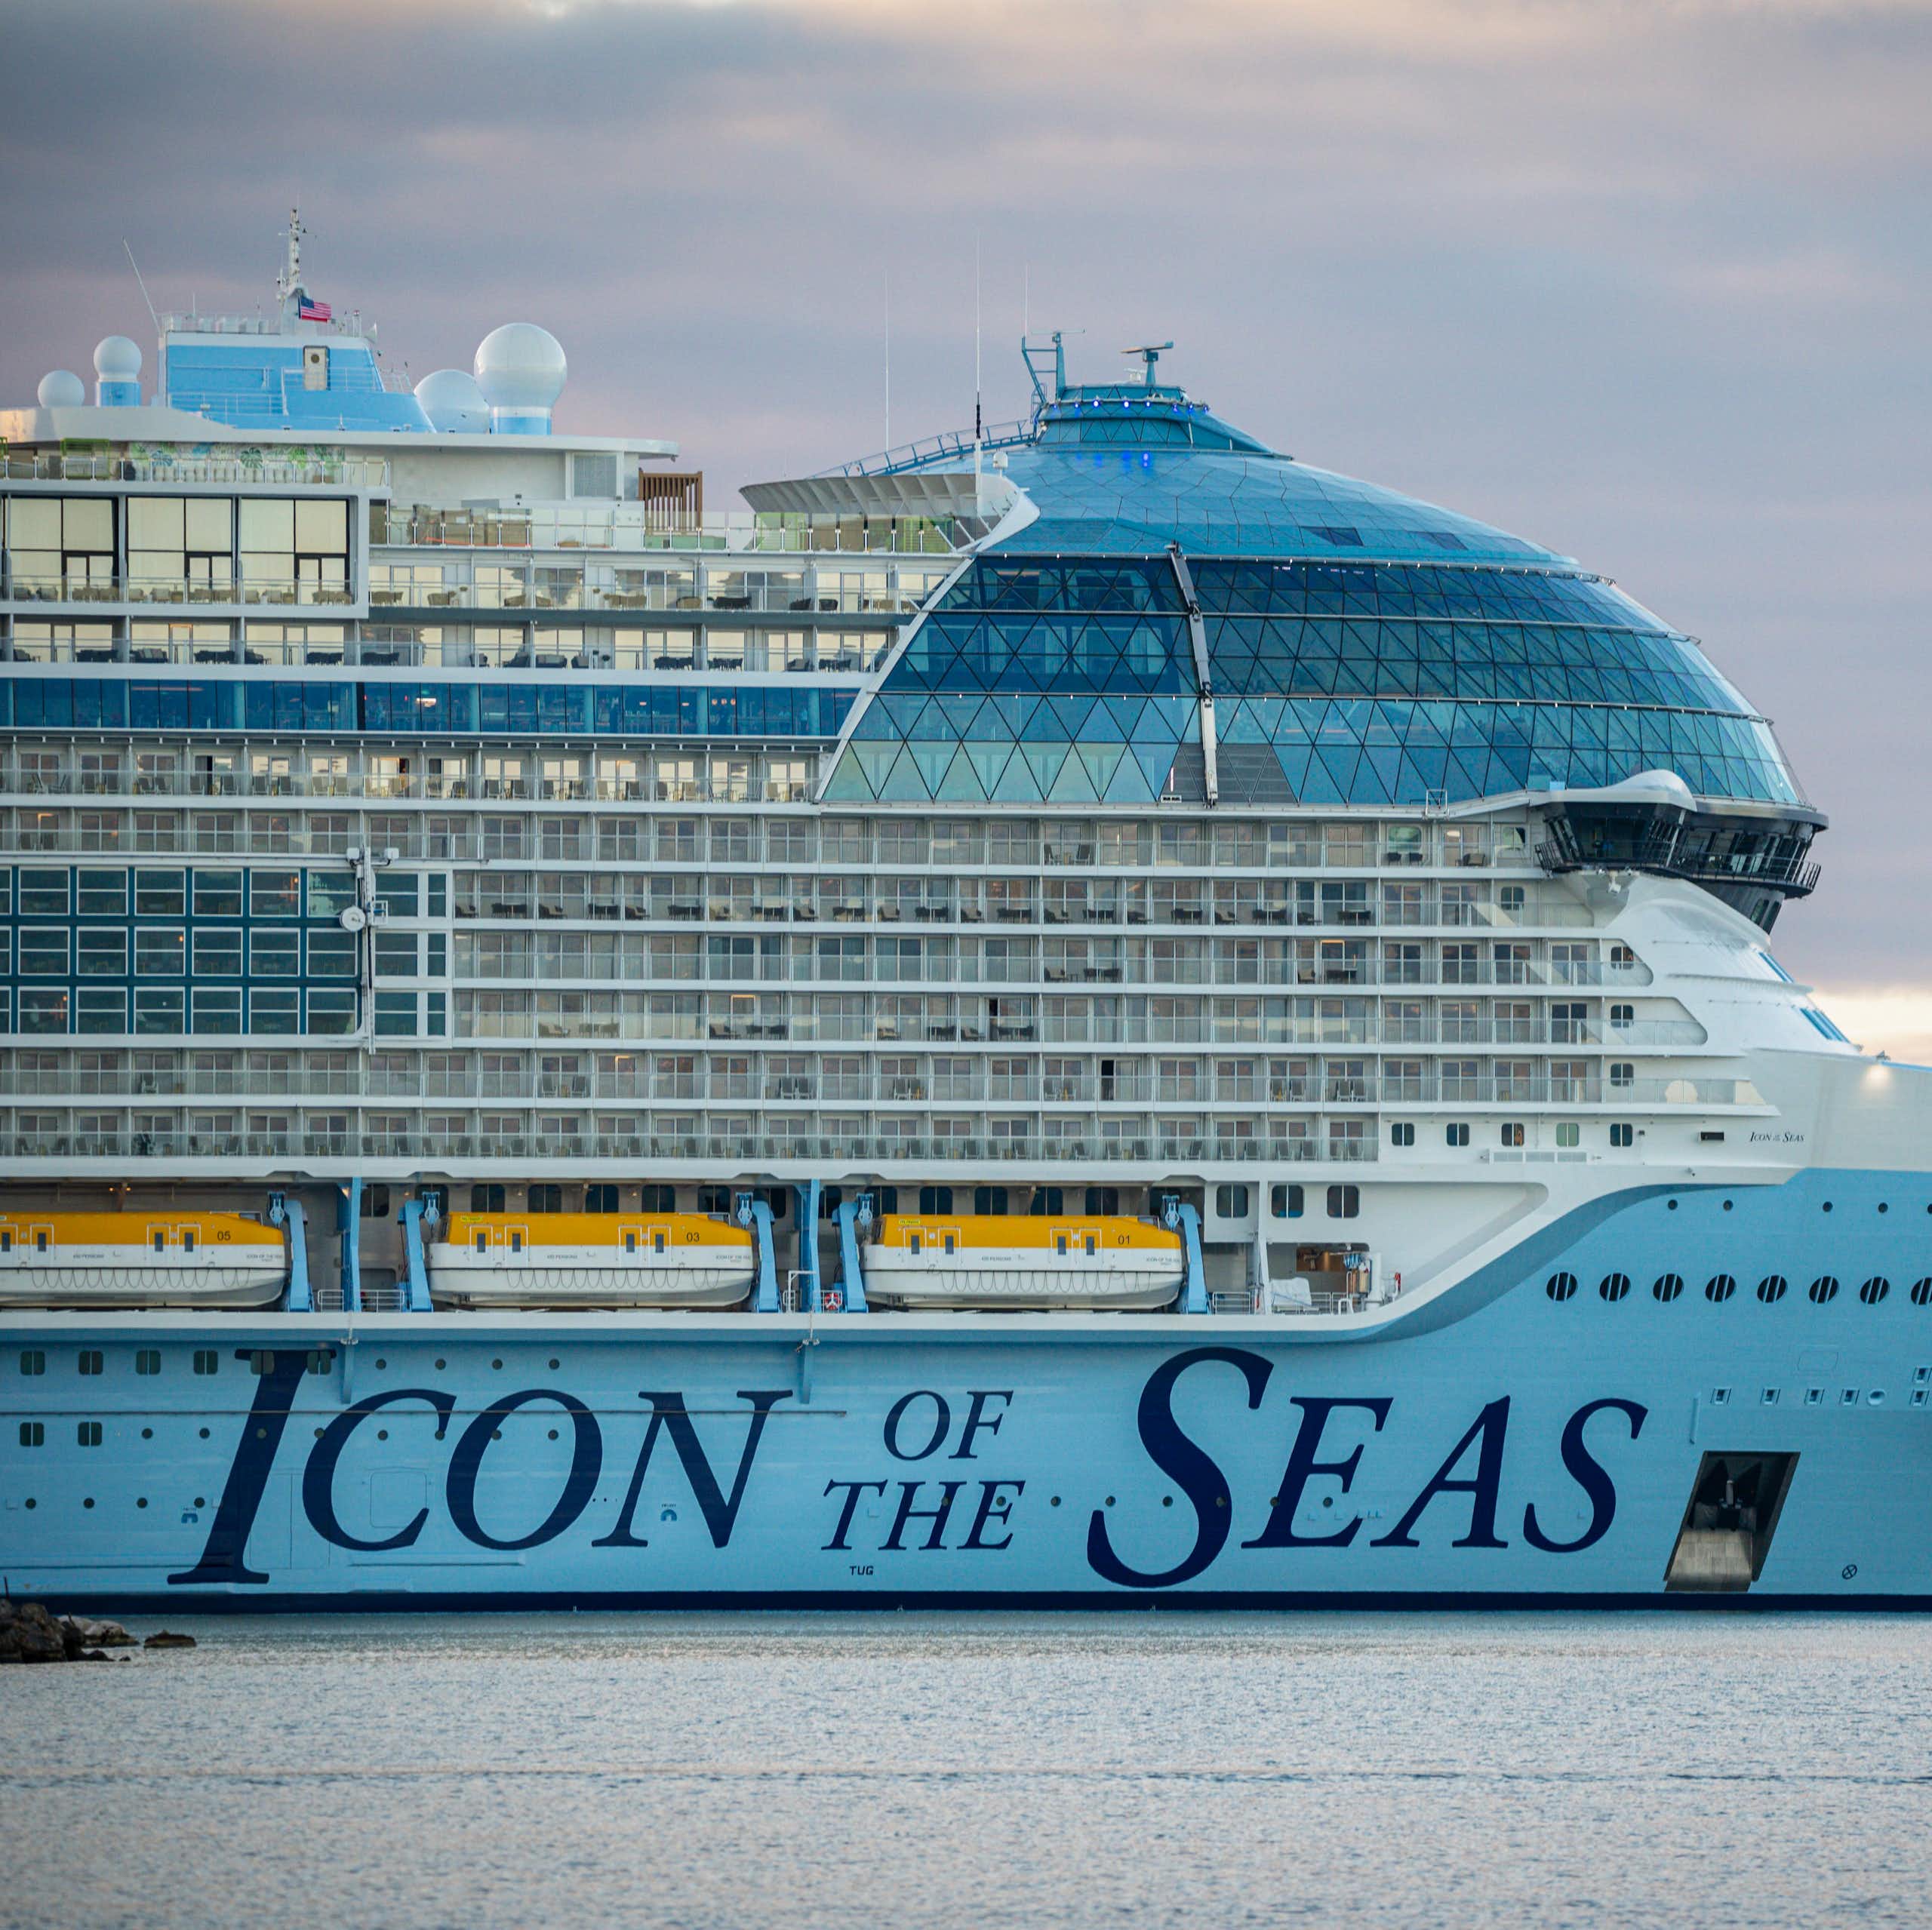 A huge cruise ship docked in the ocean with the words 'Icon of the Seas' written on the side